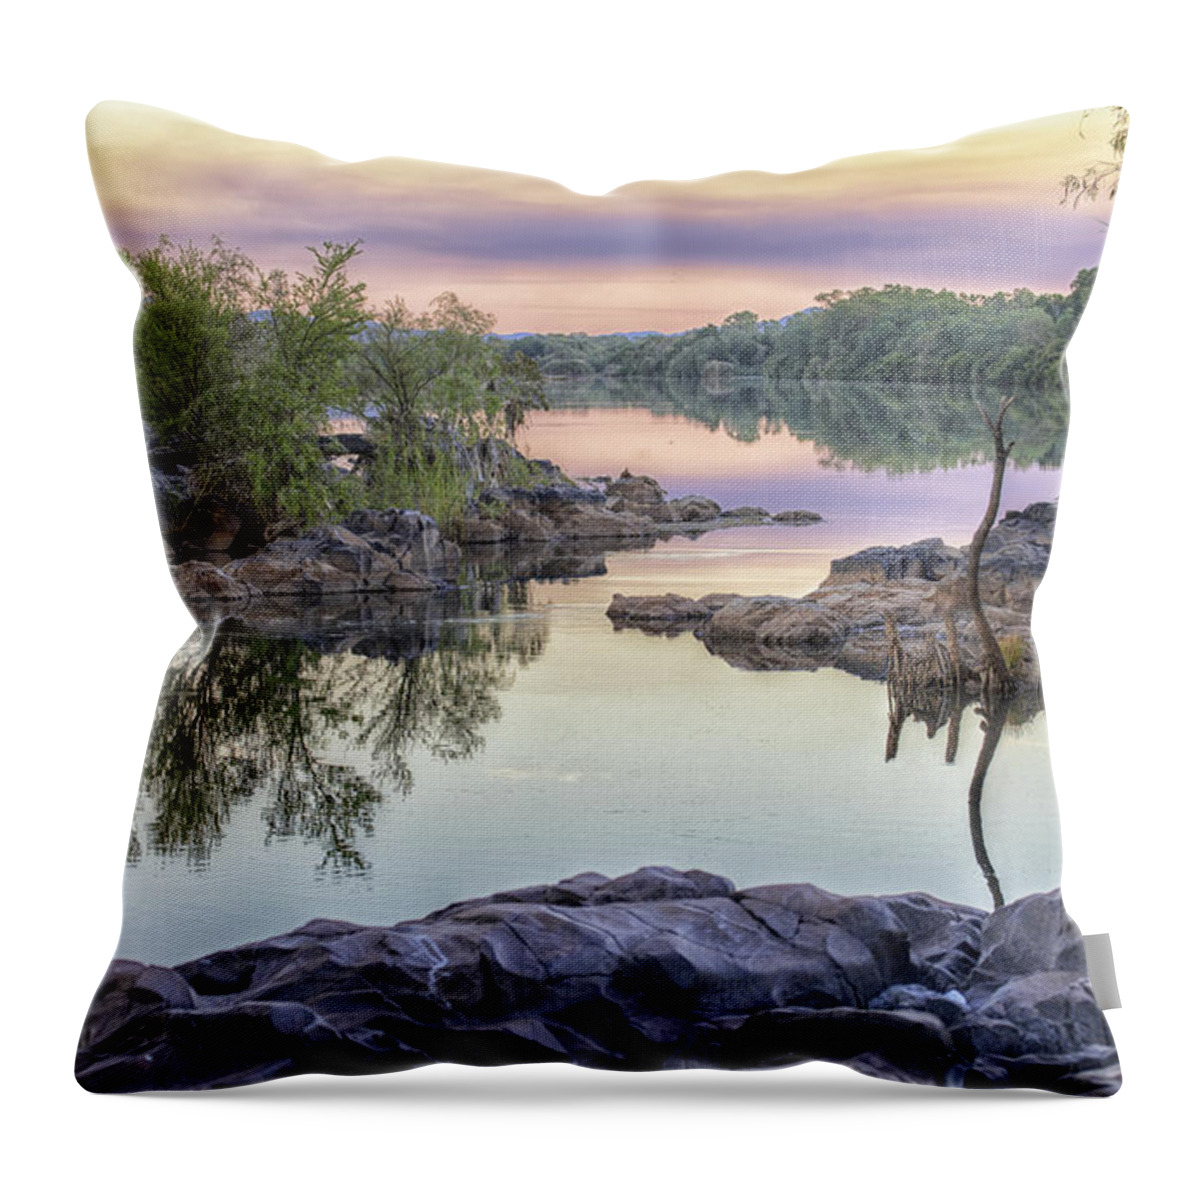 River Throw Pillow featuring the photograph Riverside by Adam Krawczyk